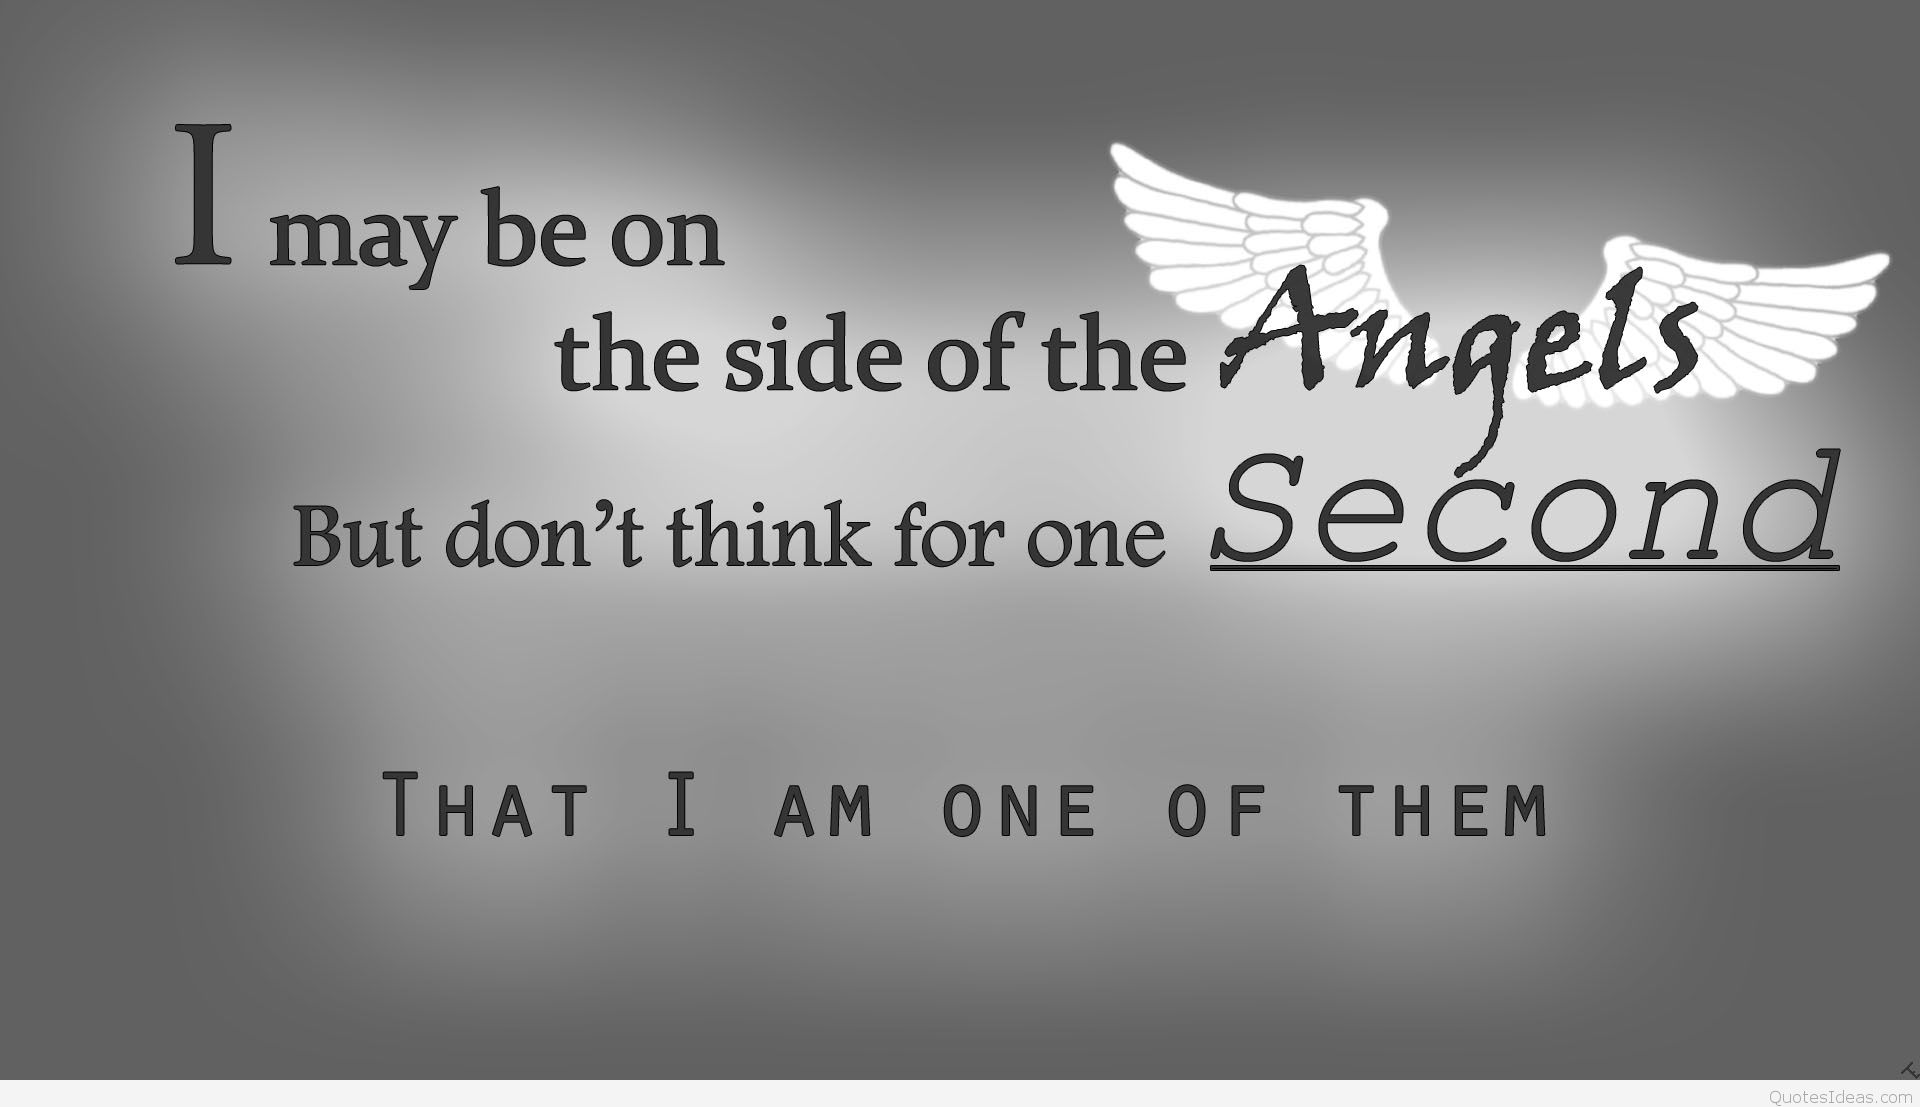 Sherlock Quotes Wallpaper Pictures Movie Games Photo - Quote Angel - HD Wallpaper 